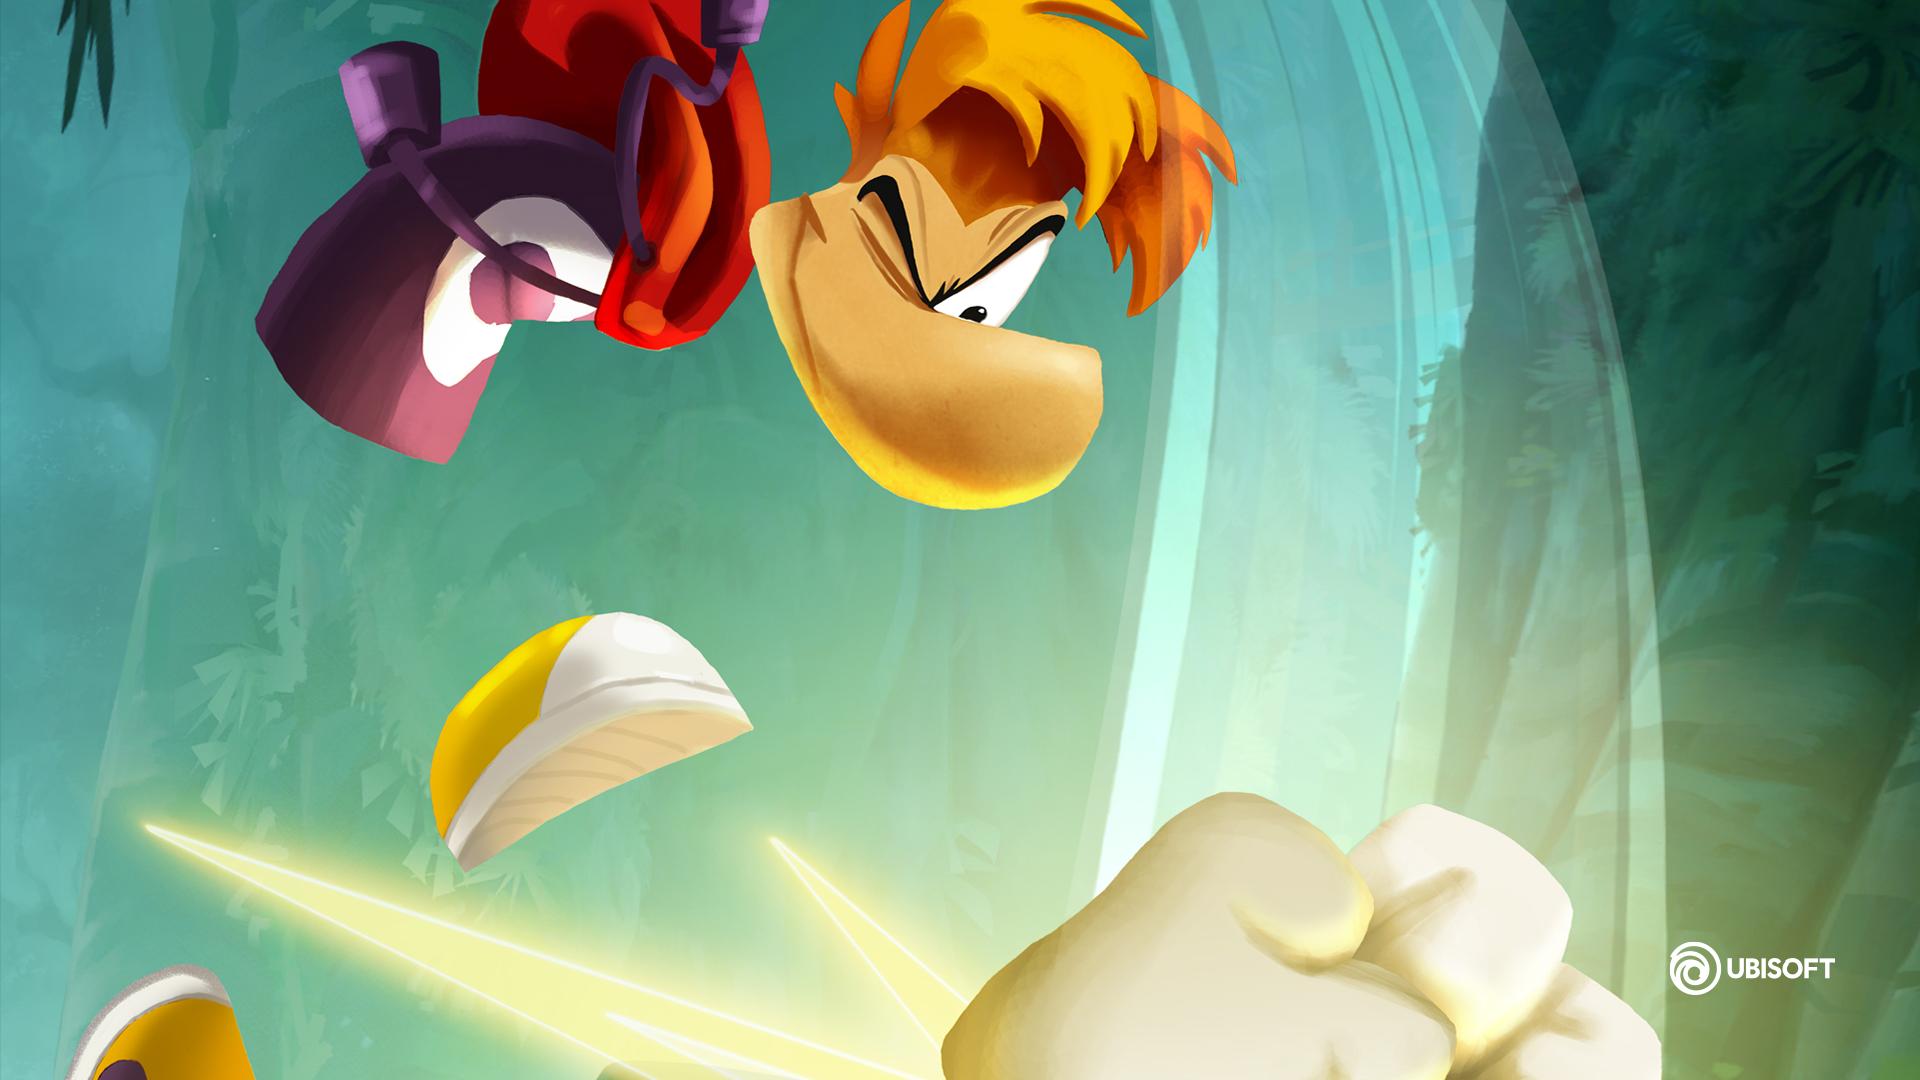 HD wallpaper, Video Game Characters, Rayman, Ubisoft, Video Games